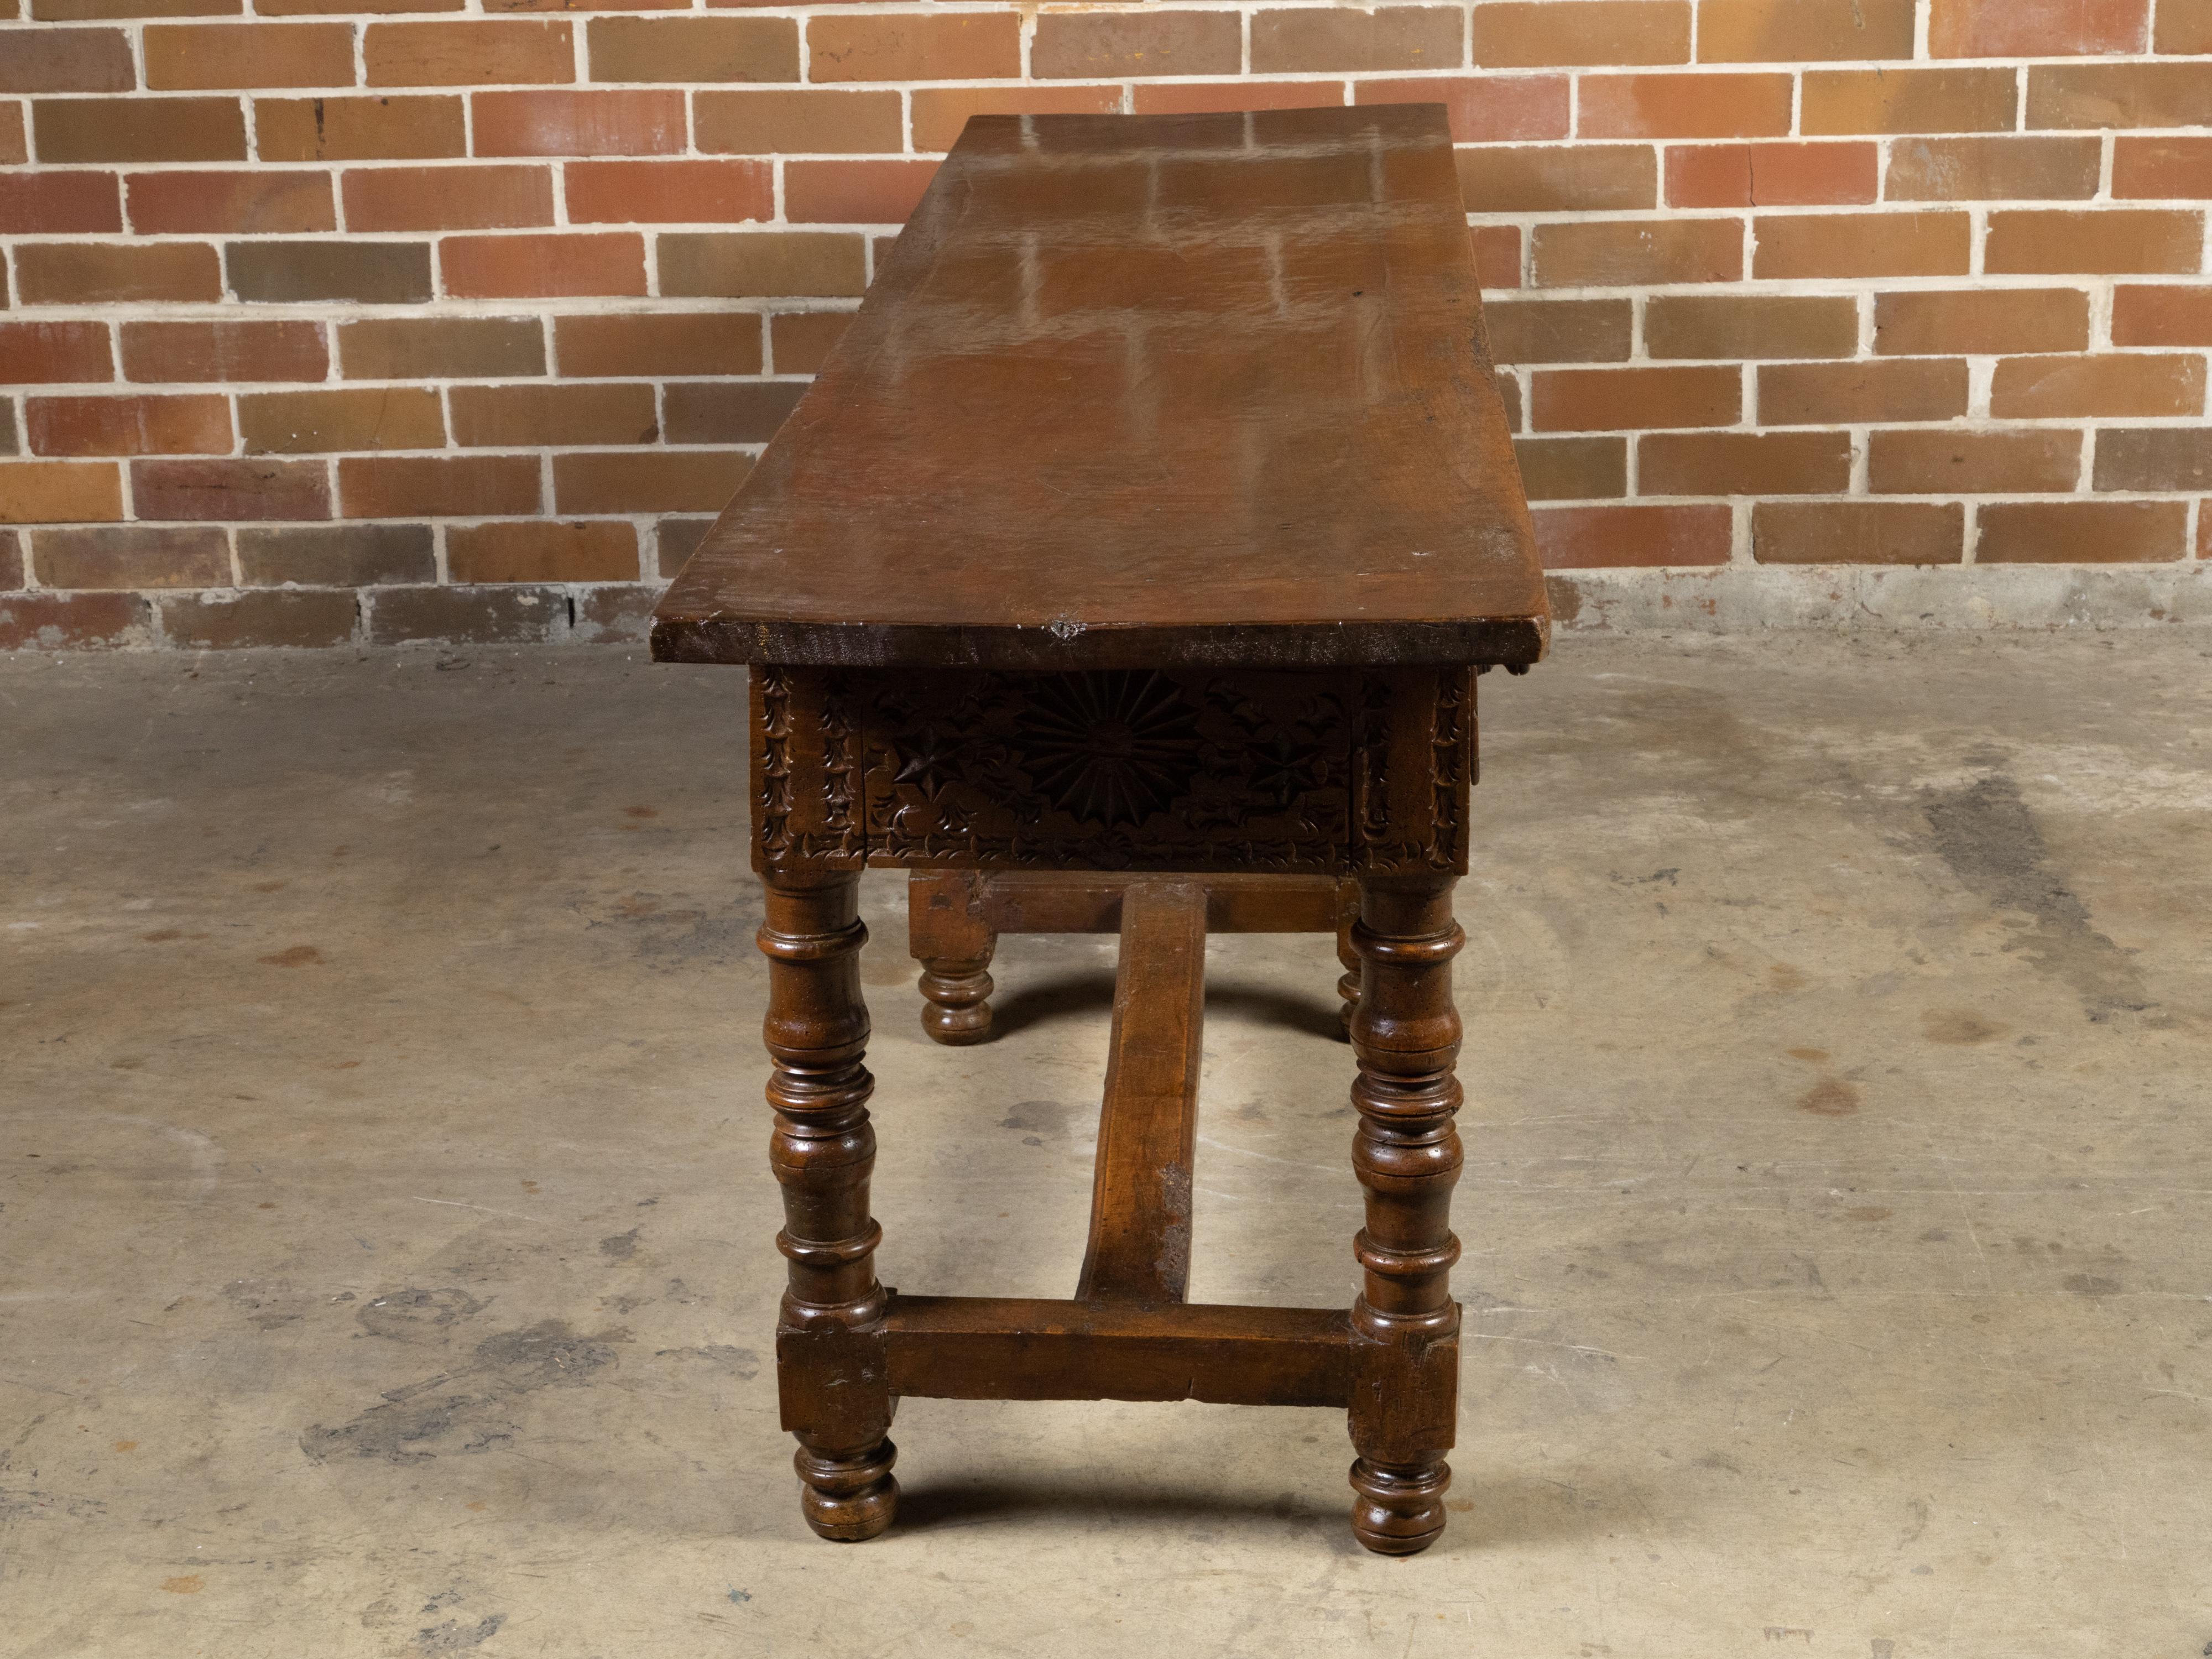 18th Century and Earlier Spanish Colonial 18th Century Walnut Table with Four Richly Carved Drawers For Sale